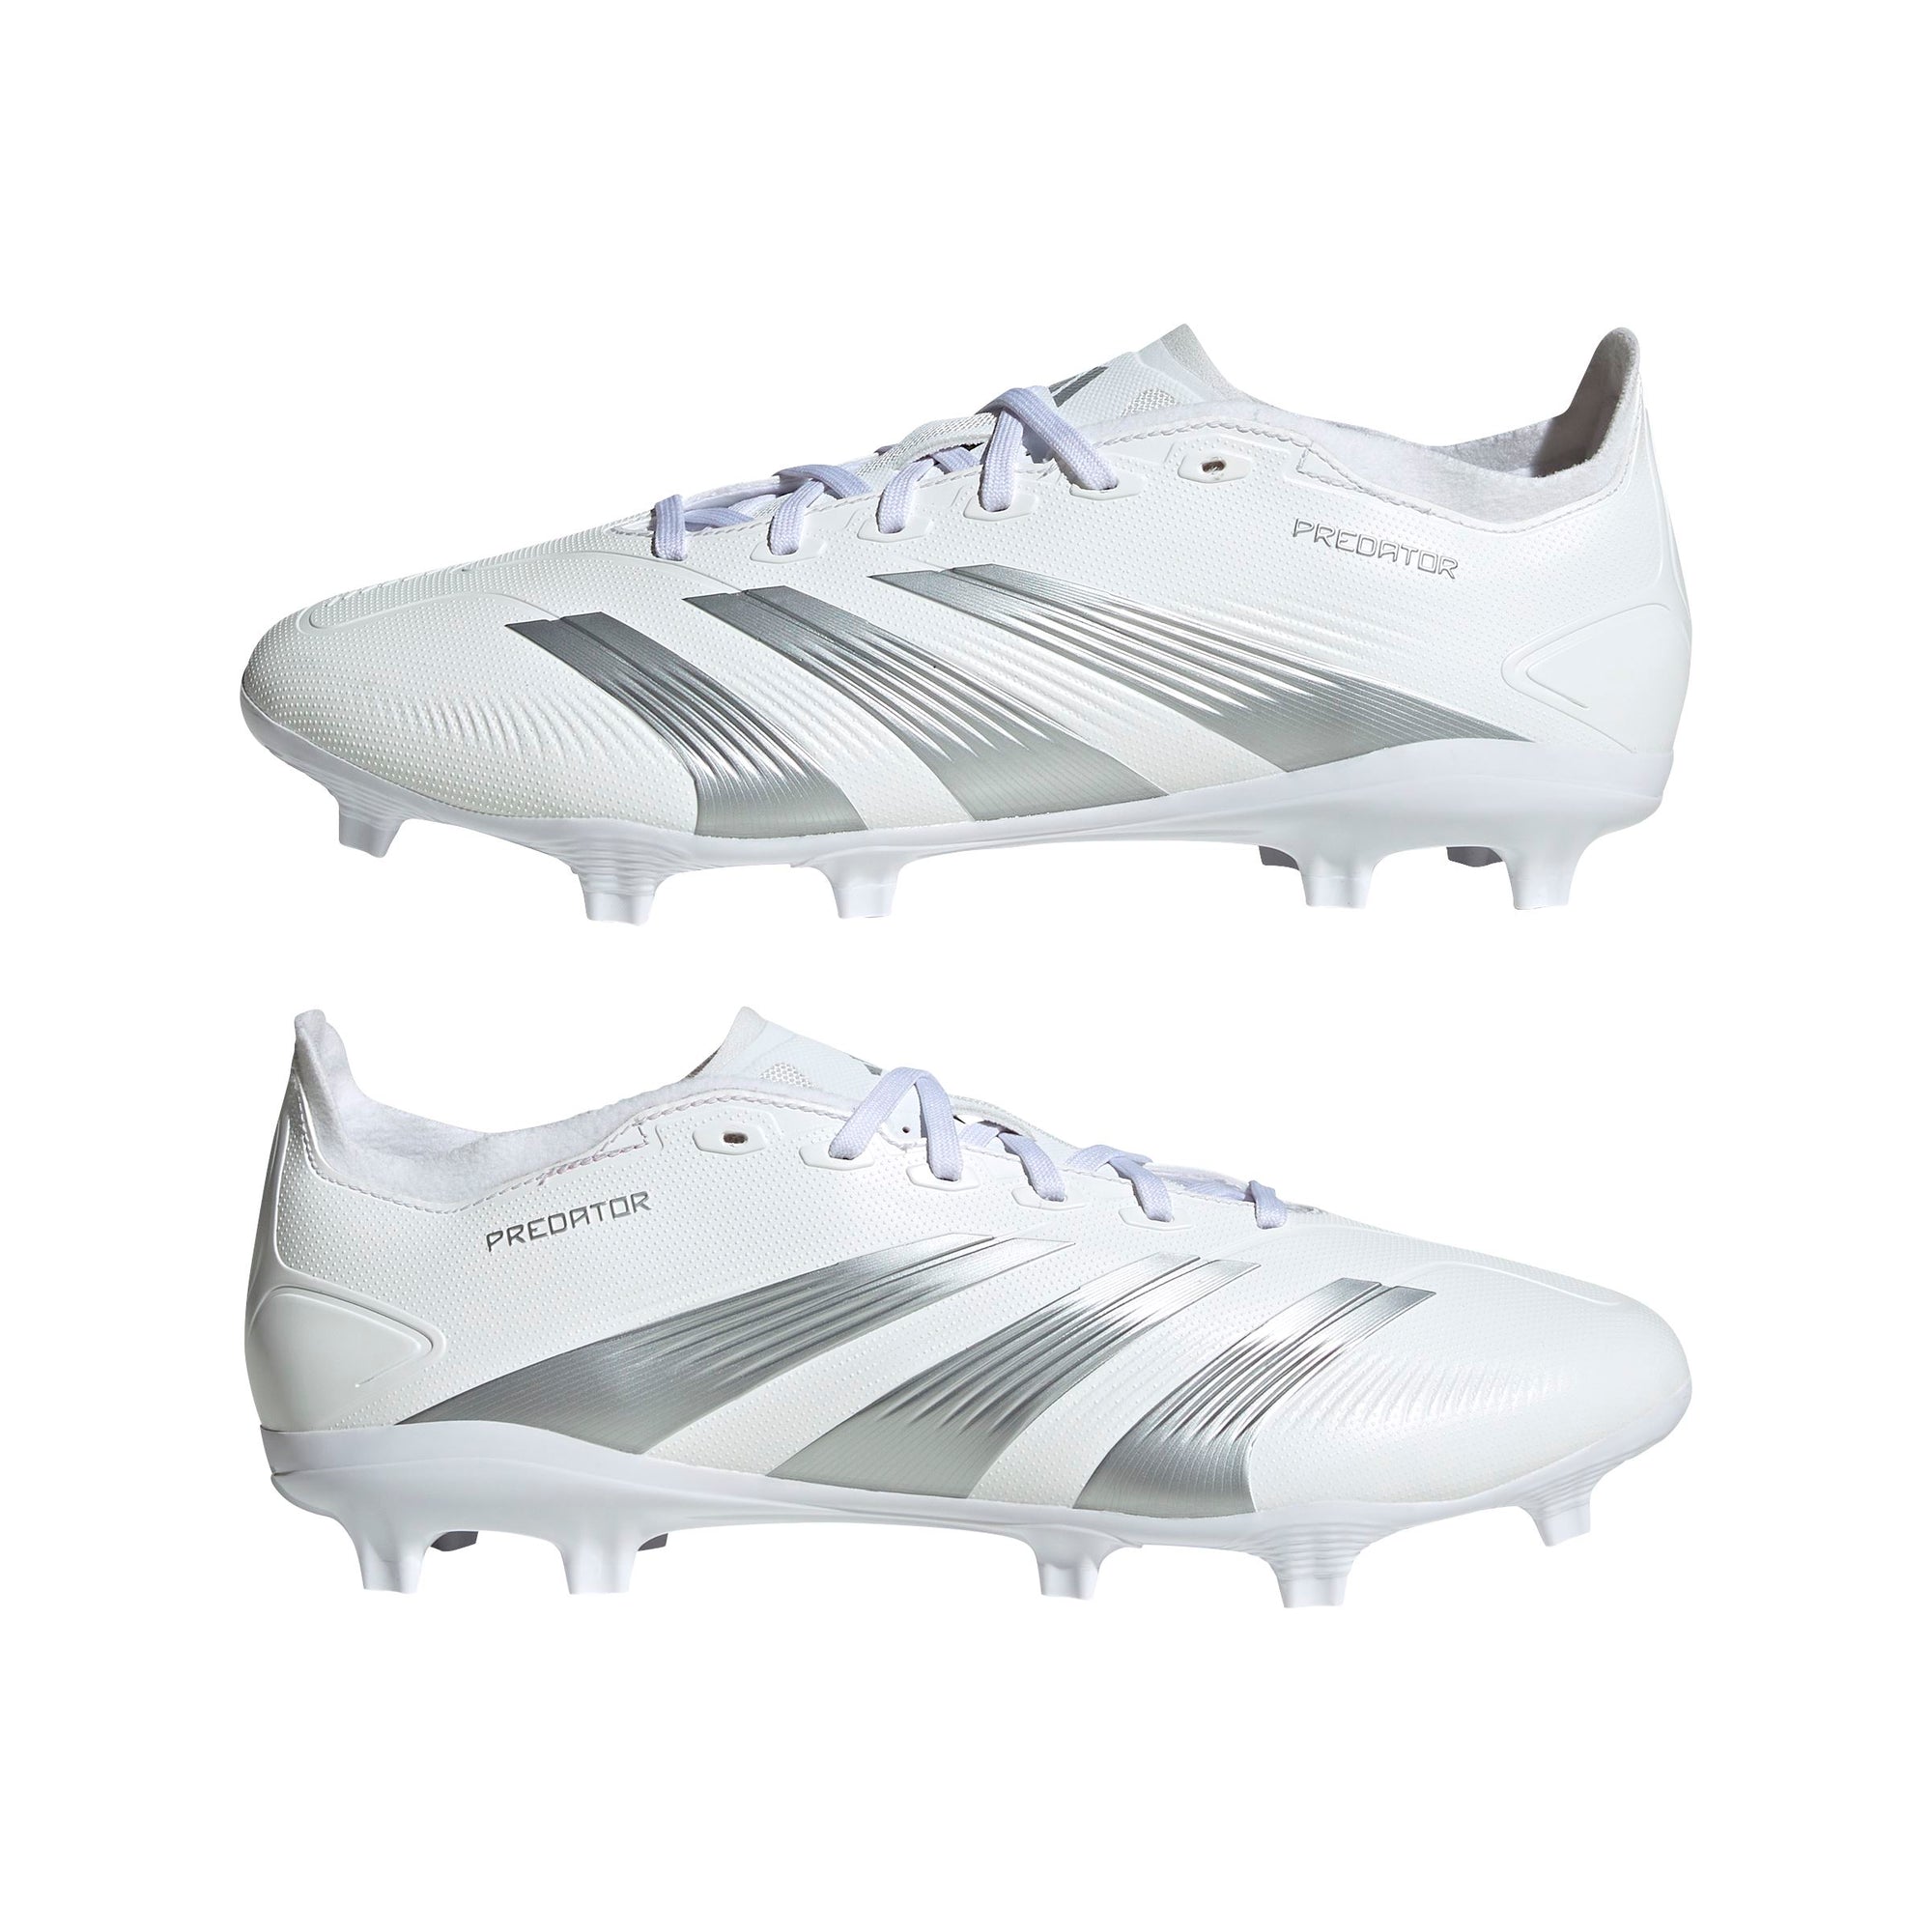 adidas Men's Predator League Firm Ground Soccer Cleats | IE2372 Adidas 7.5 FTWR WHITE/SILVER MET./GREY ONE 